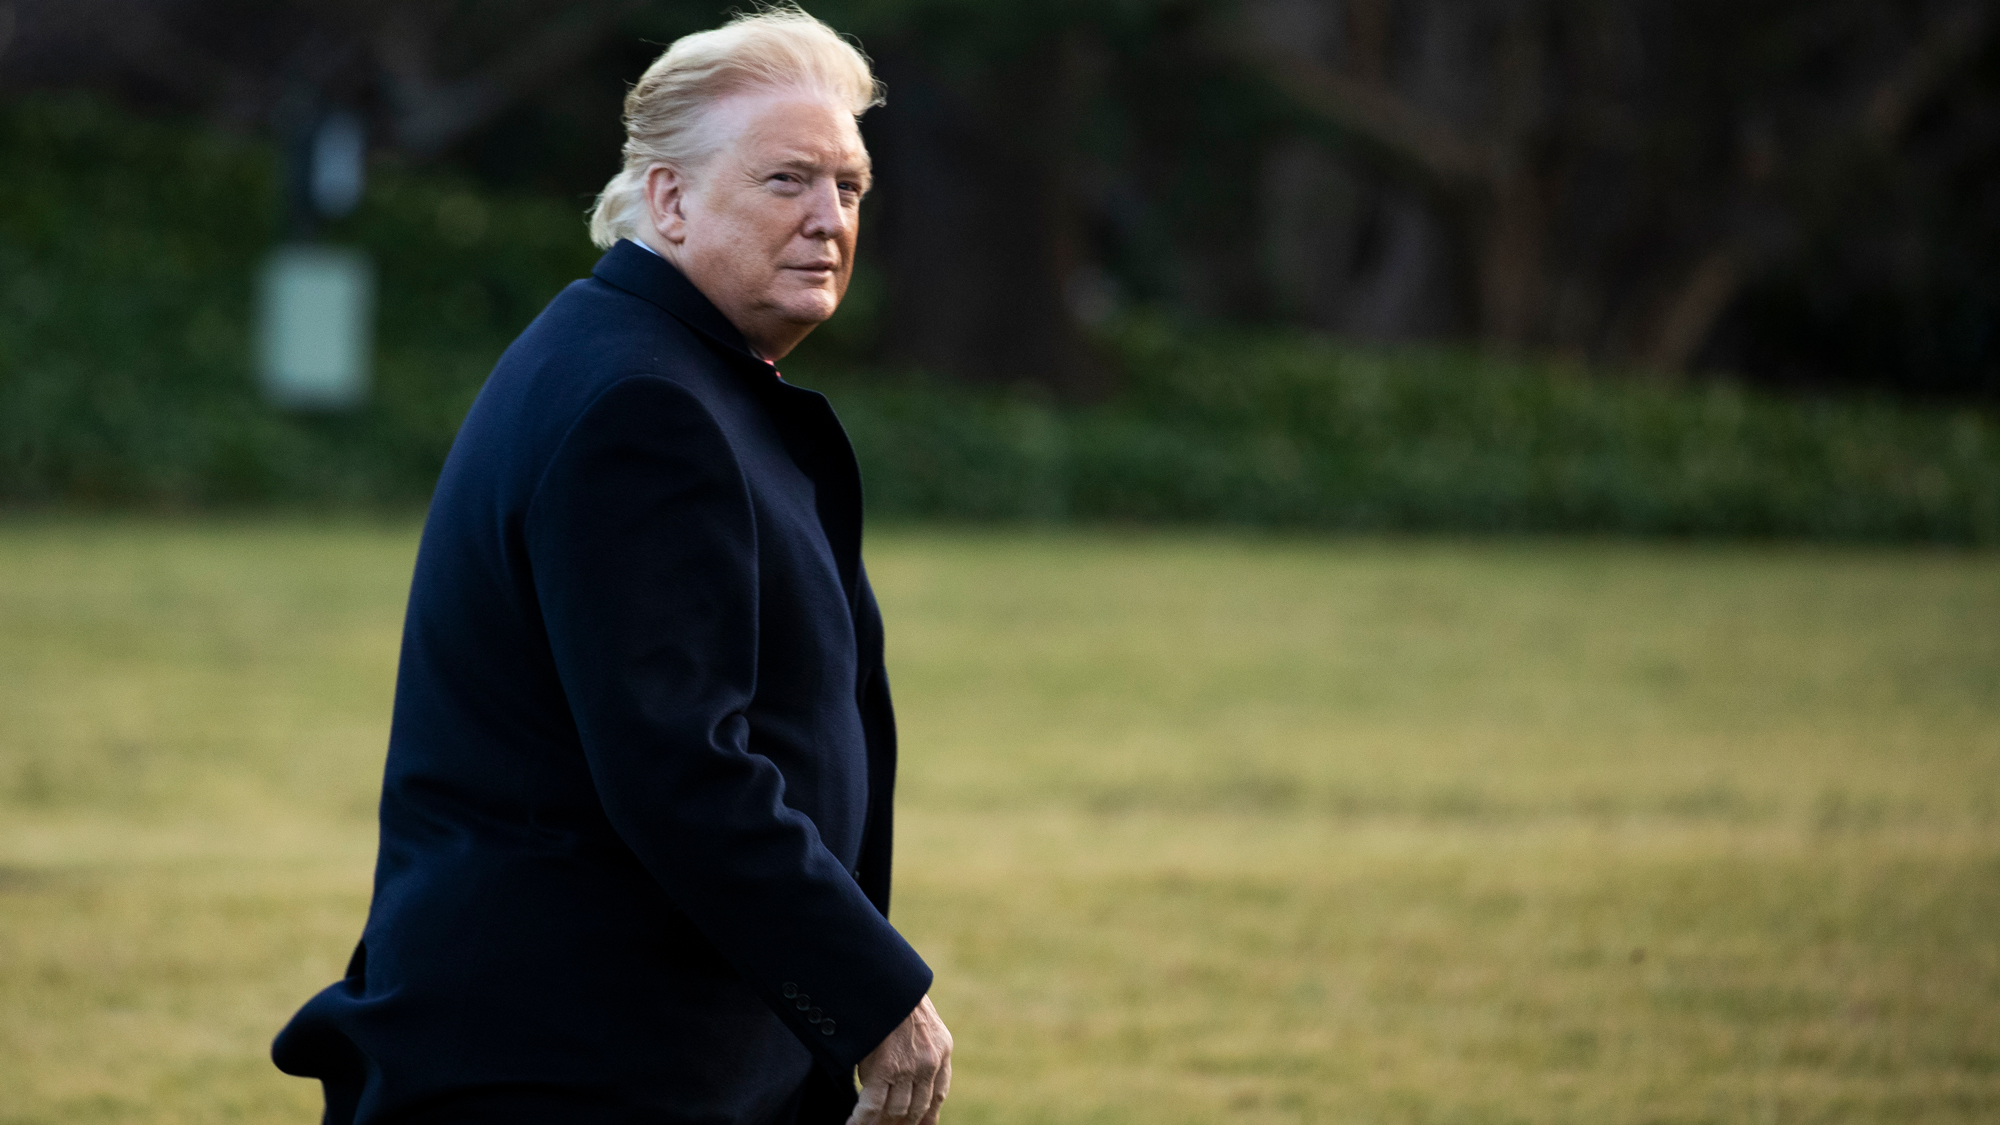 Trump Blames The Wind For Super Viral Photo But Says His Hair Still